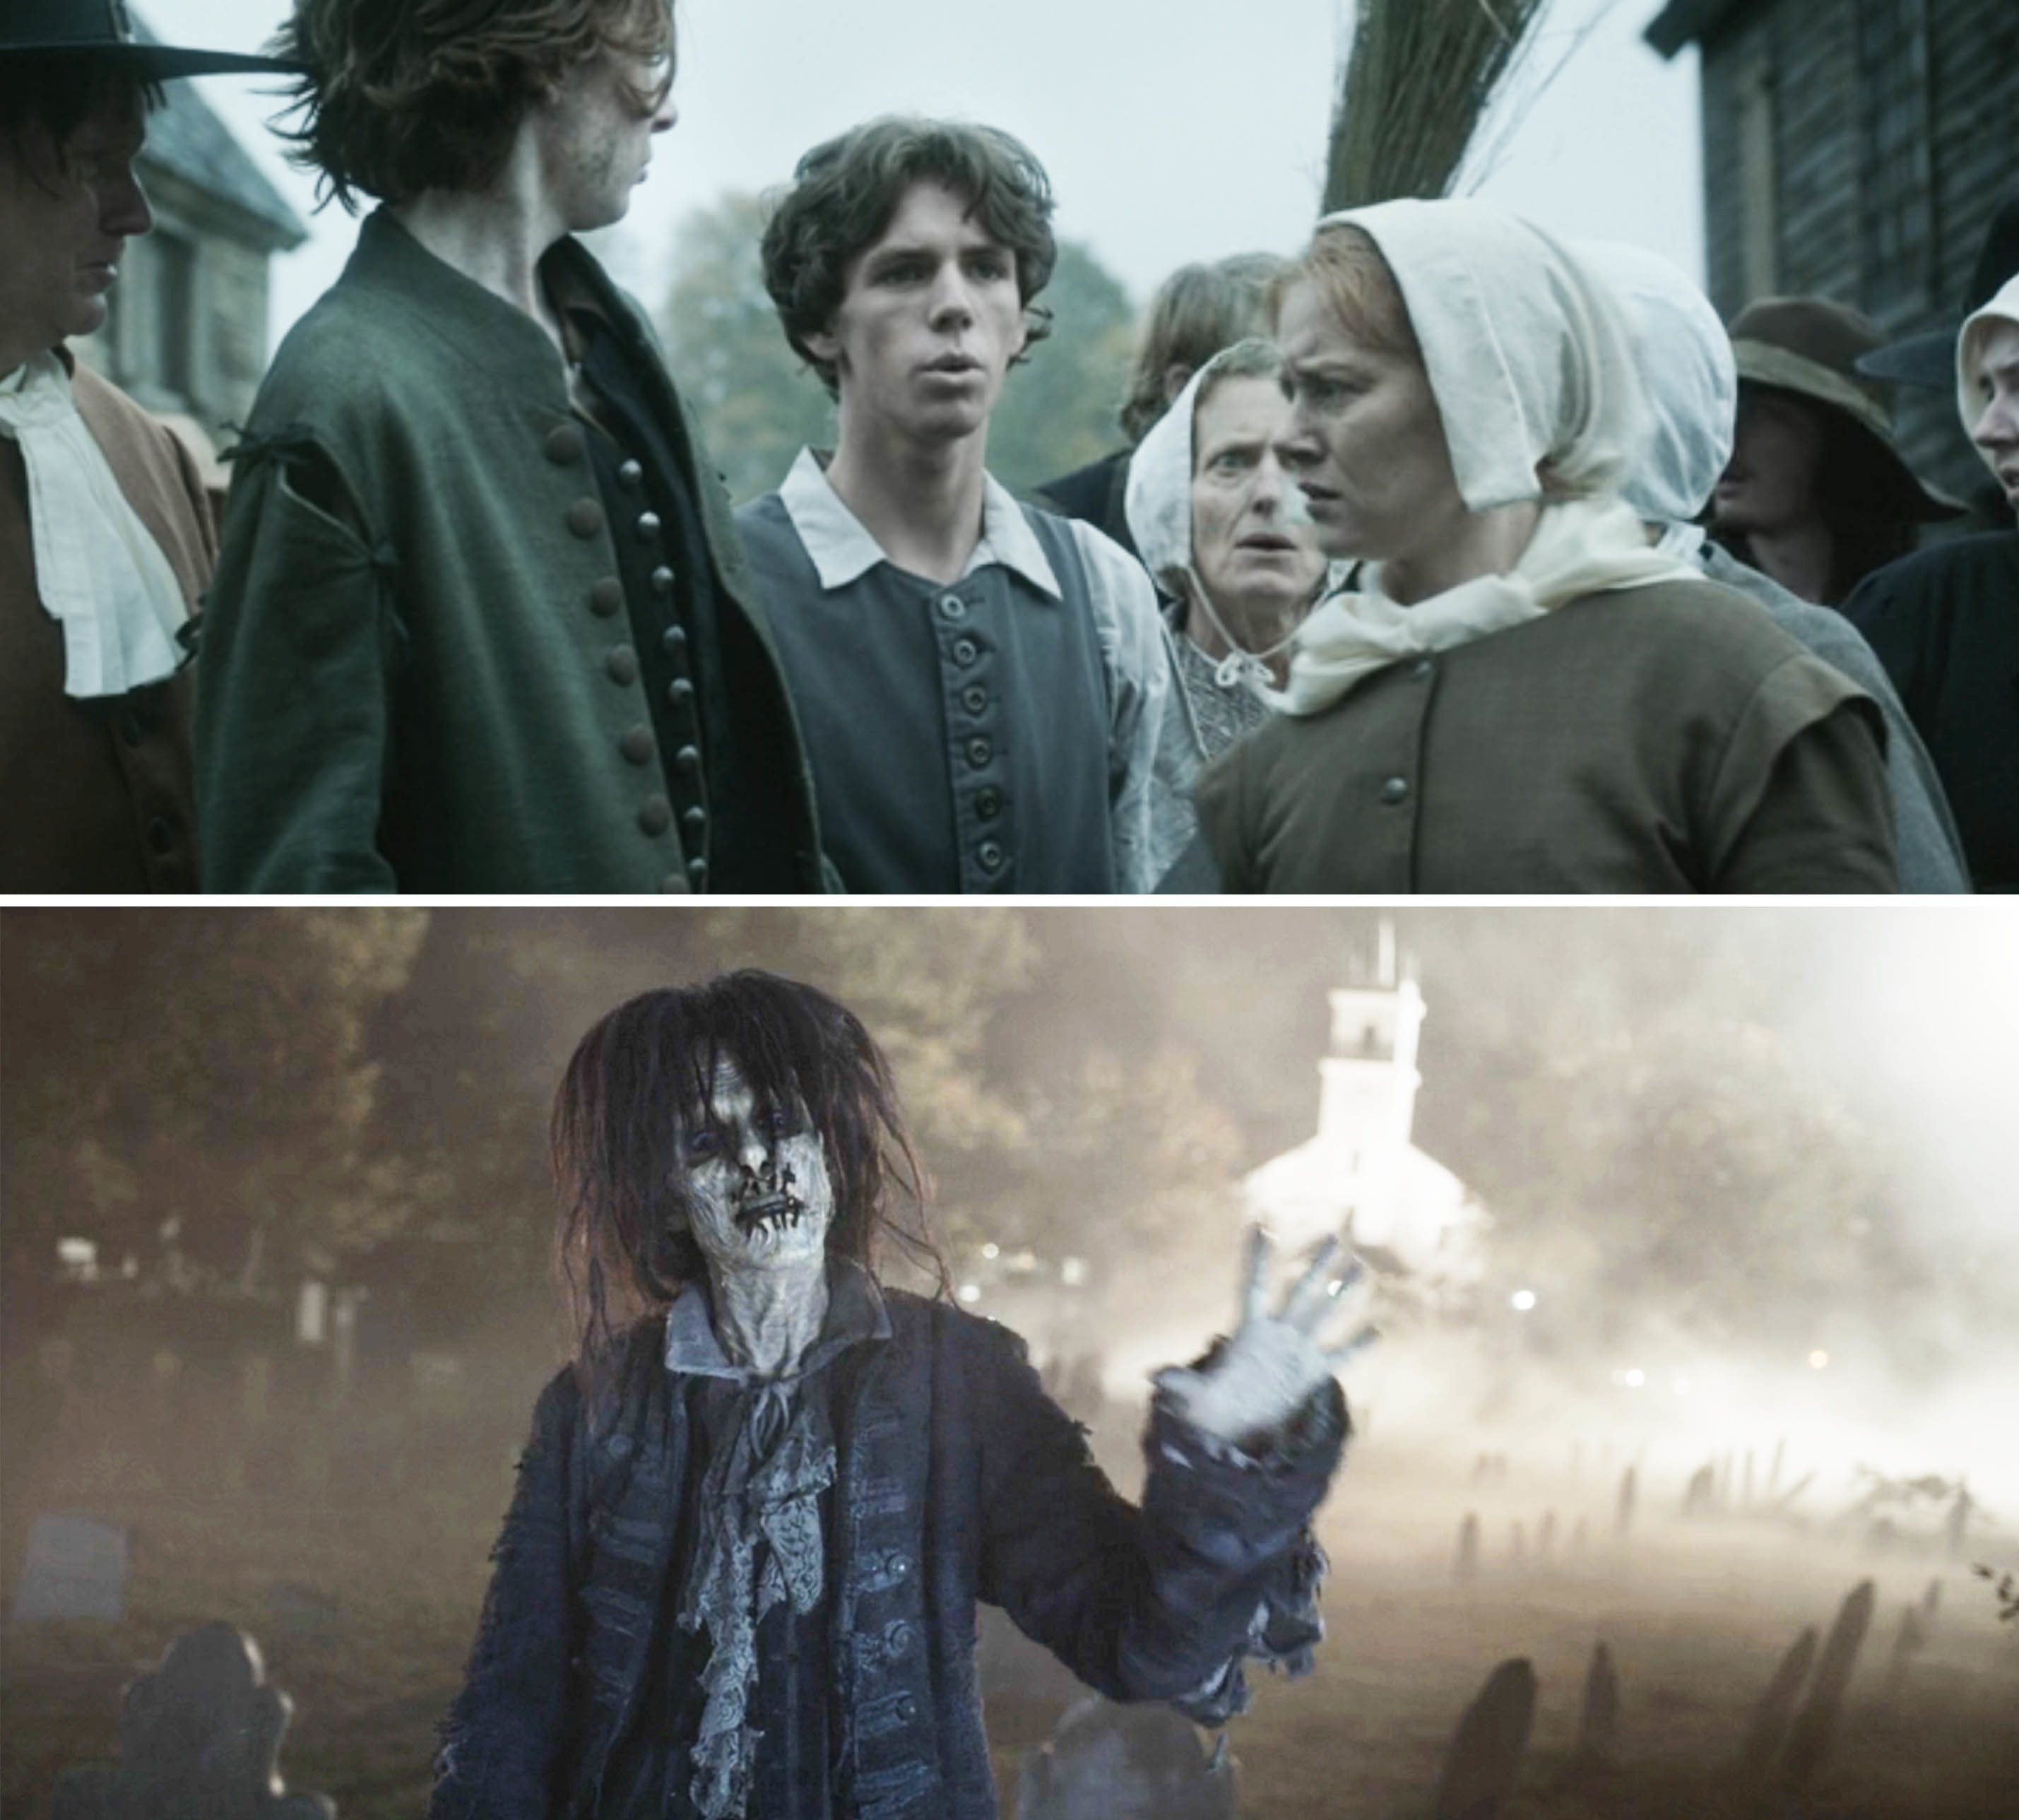 Billy in a crowd in period costume and as a ghoul